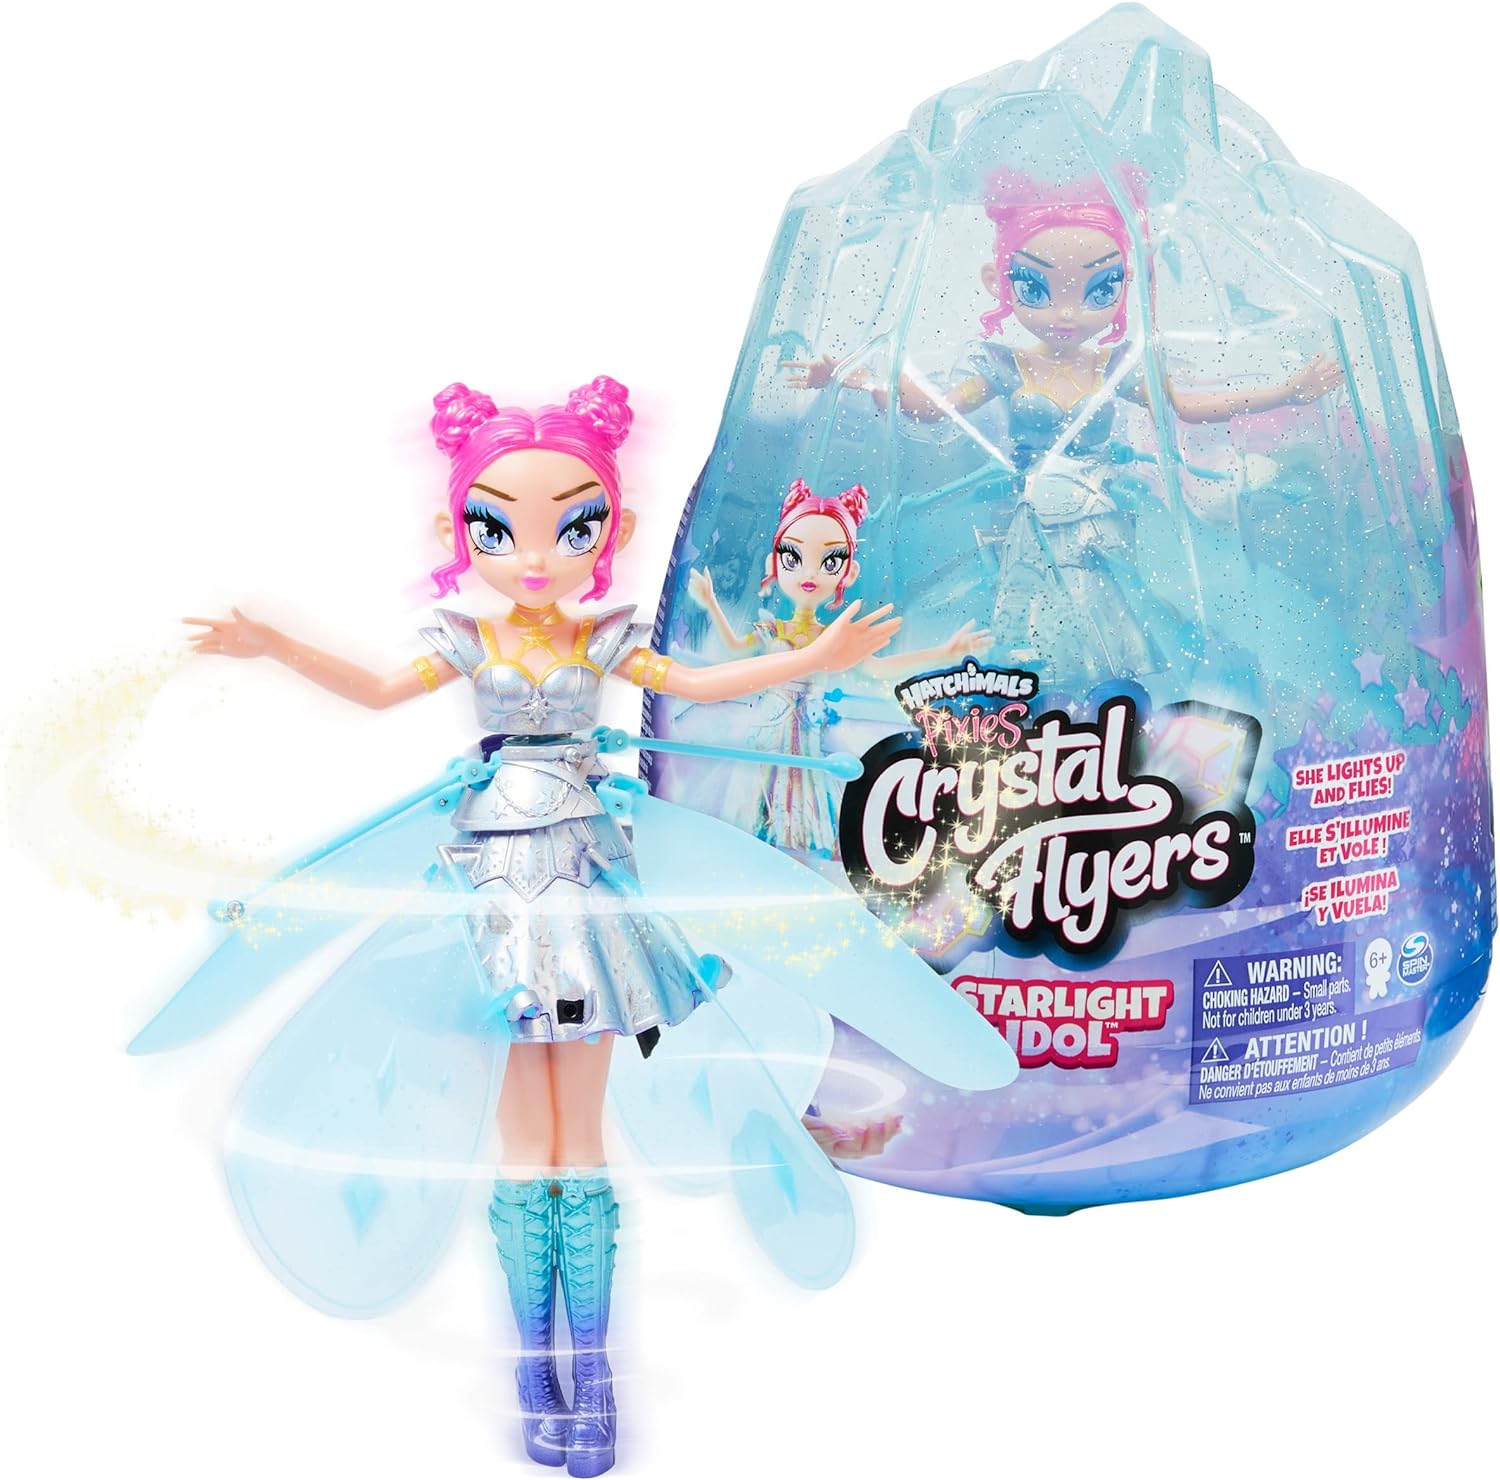 You are currently viewing Hatchimals Pixies Crystal Flyers Starlight Idol Toy Review